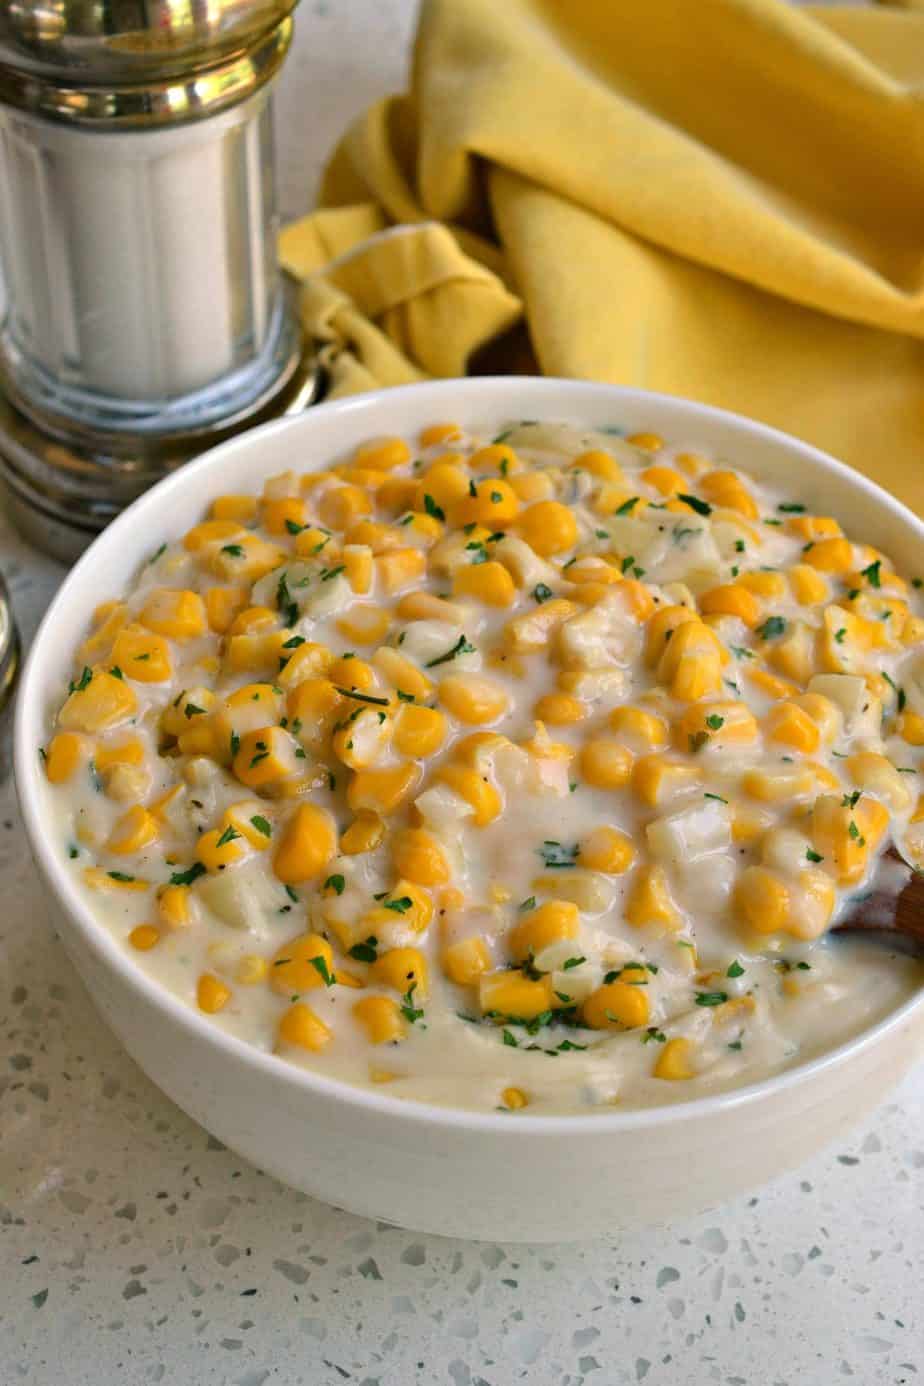 Creamed corn is a comfort food family favorite that's easy to make and pairs well with beef, chicken, or pork